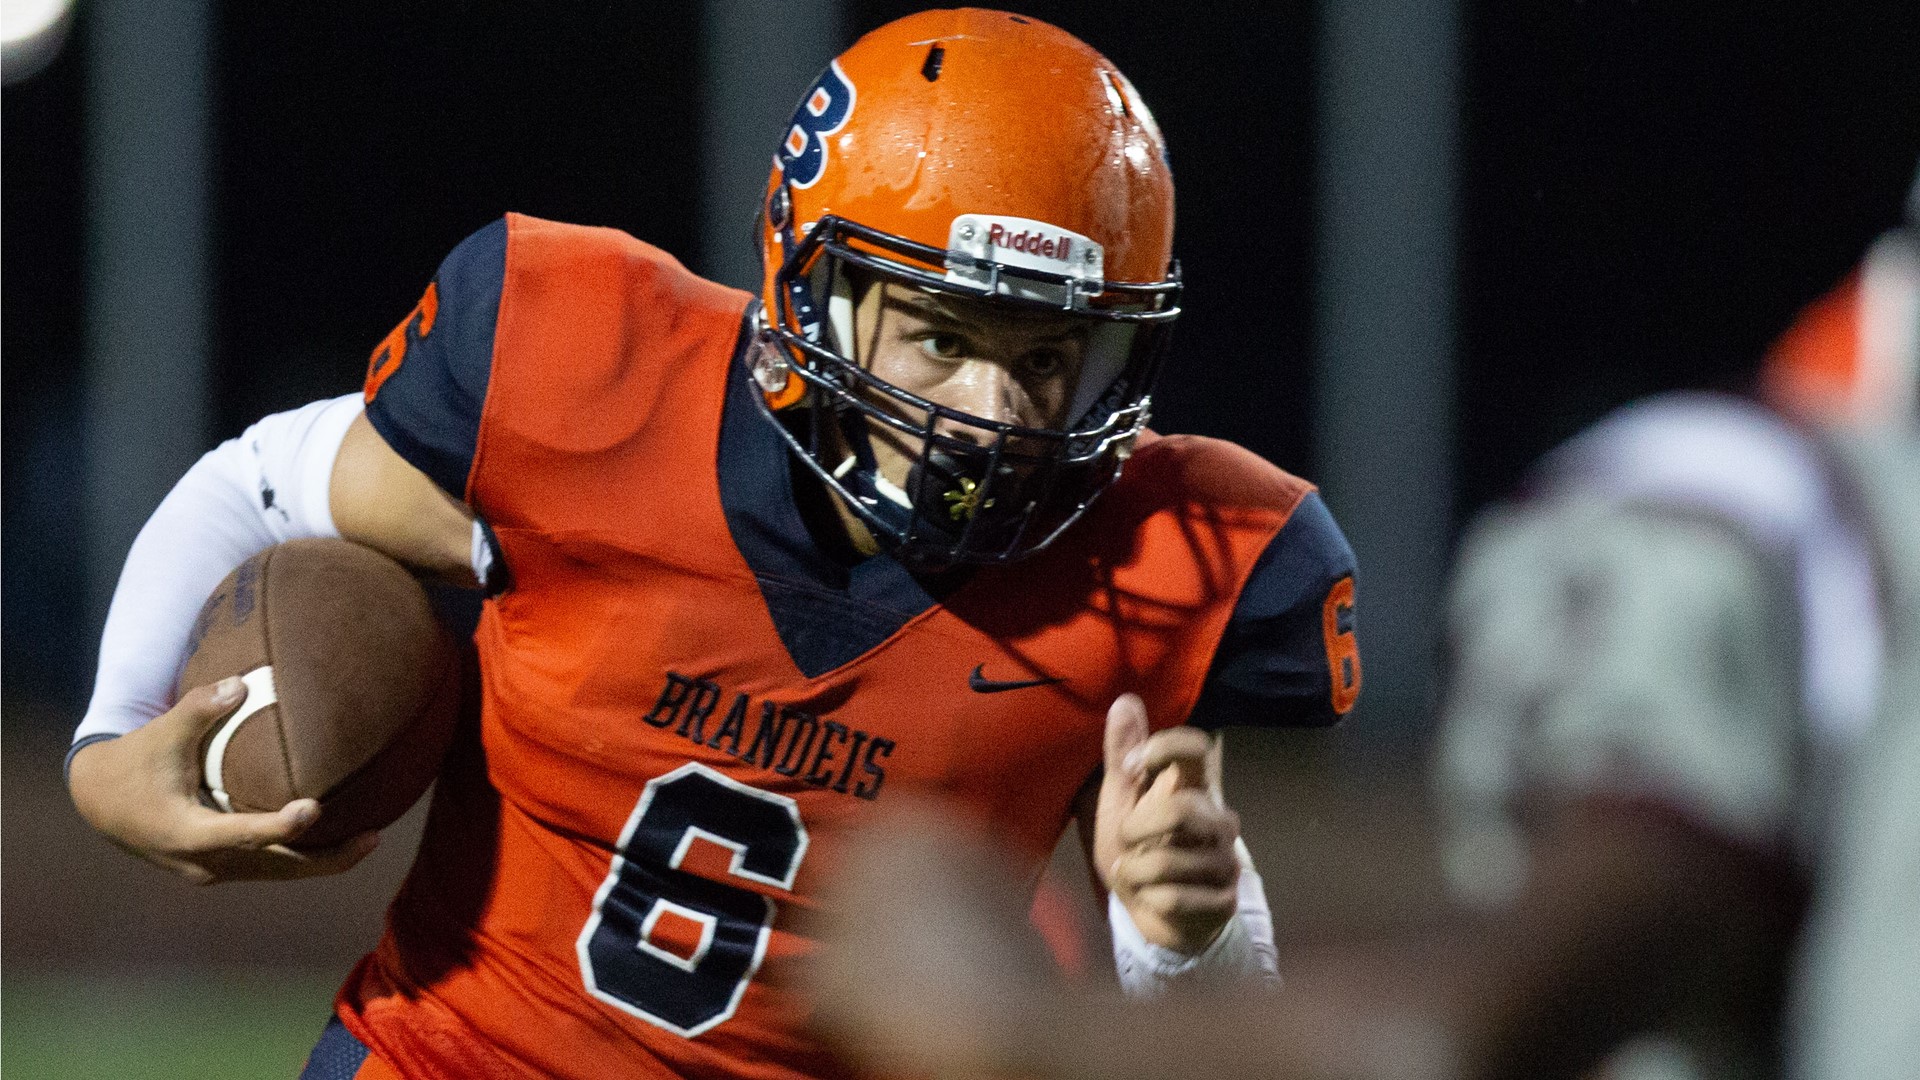 Brandeis made a deep postseason run last year and bring back dual-threat QB Jordan Battles, who broke records as a sophomore. But O'Connor hasn't lost a district game since 2015.